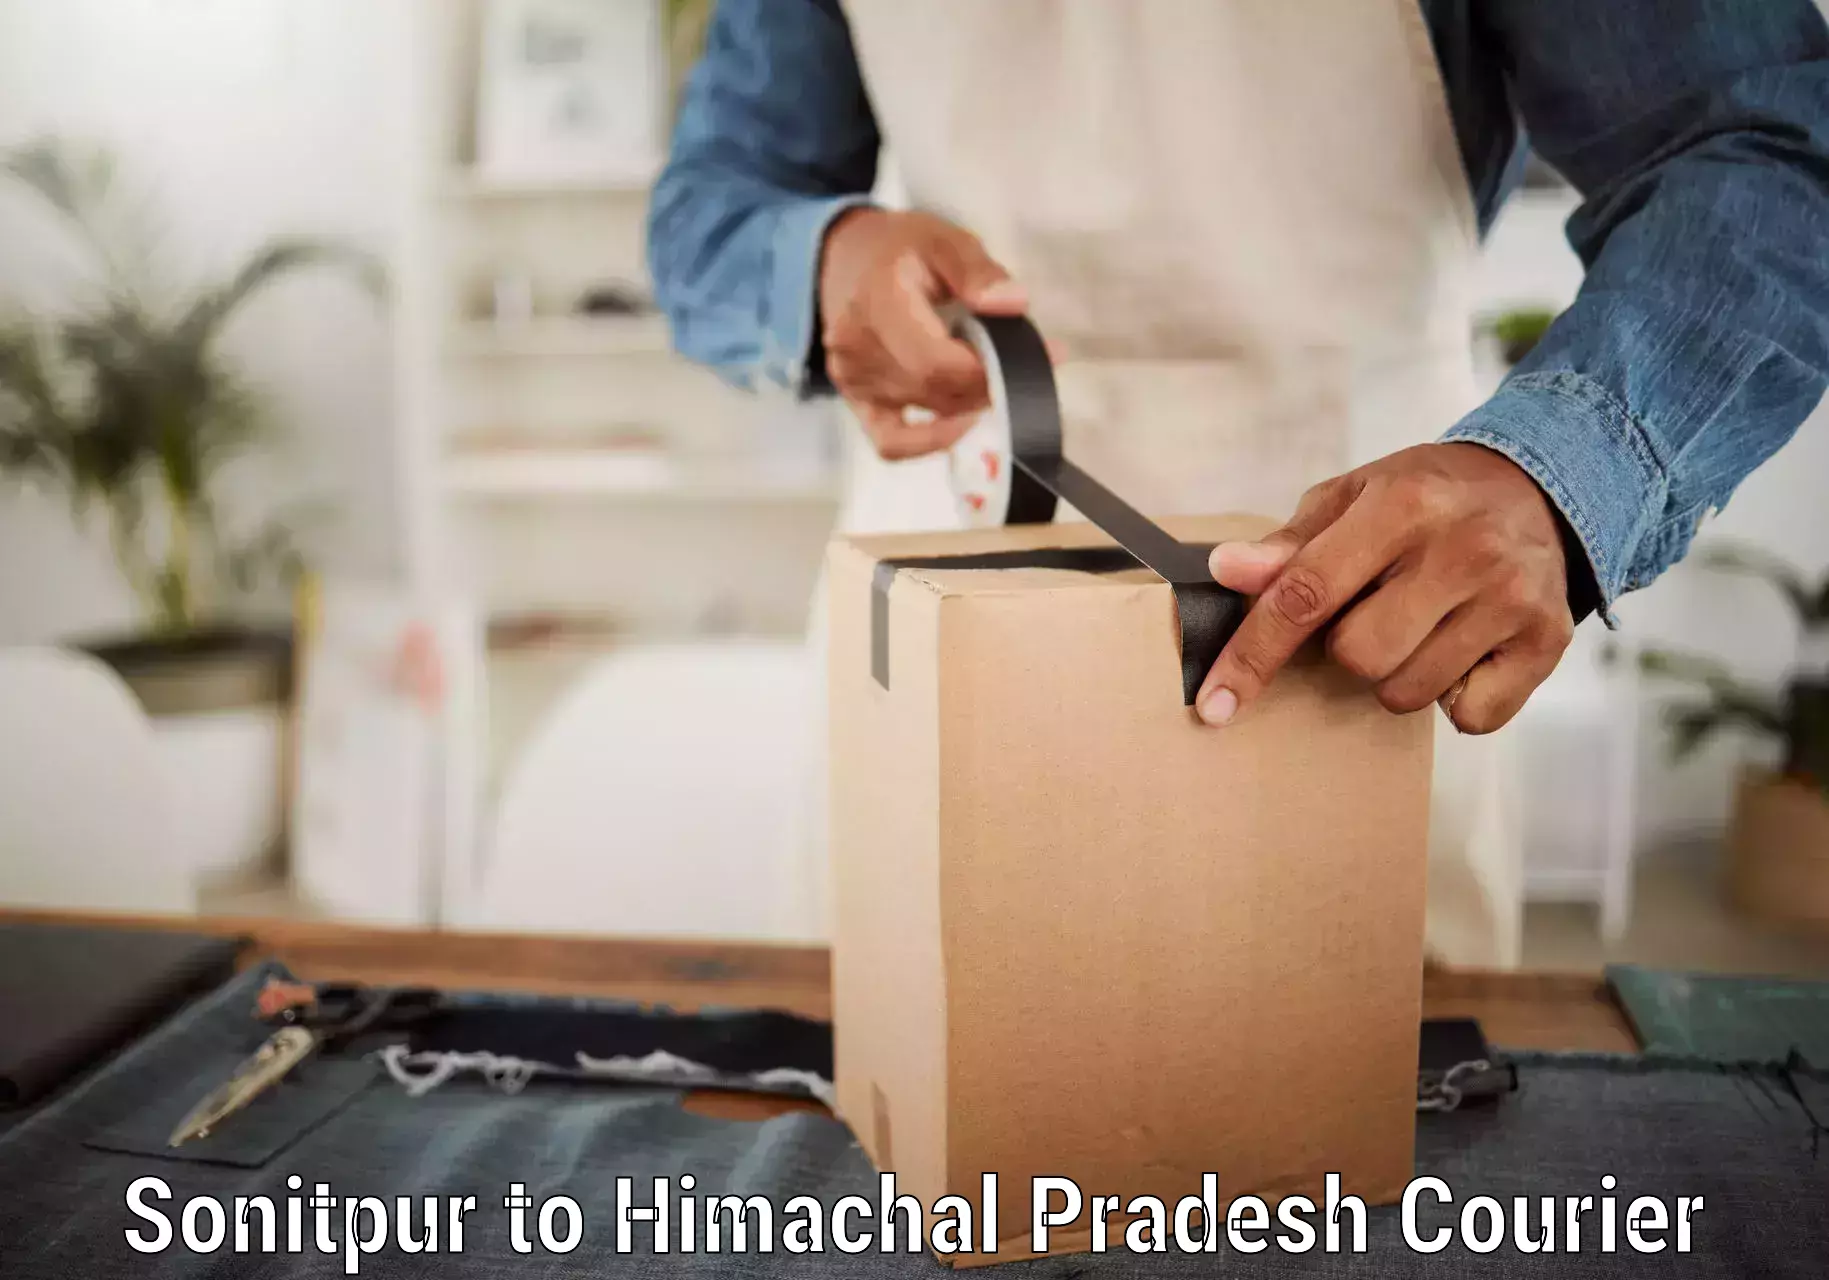 Subscription-based courier Sonitpur to Sirmaur